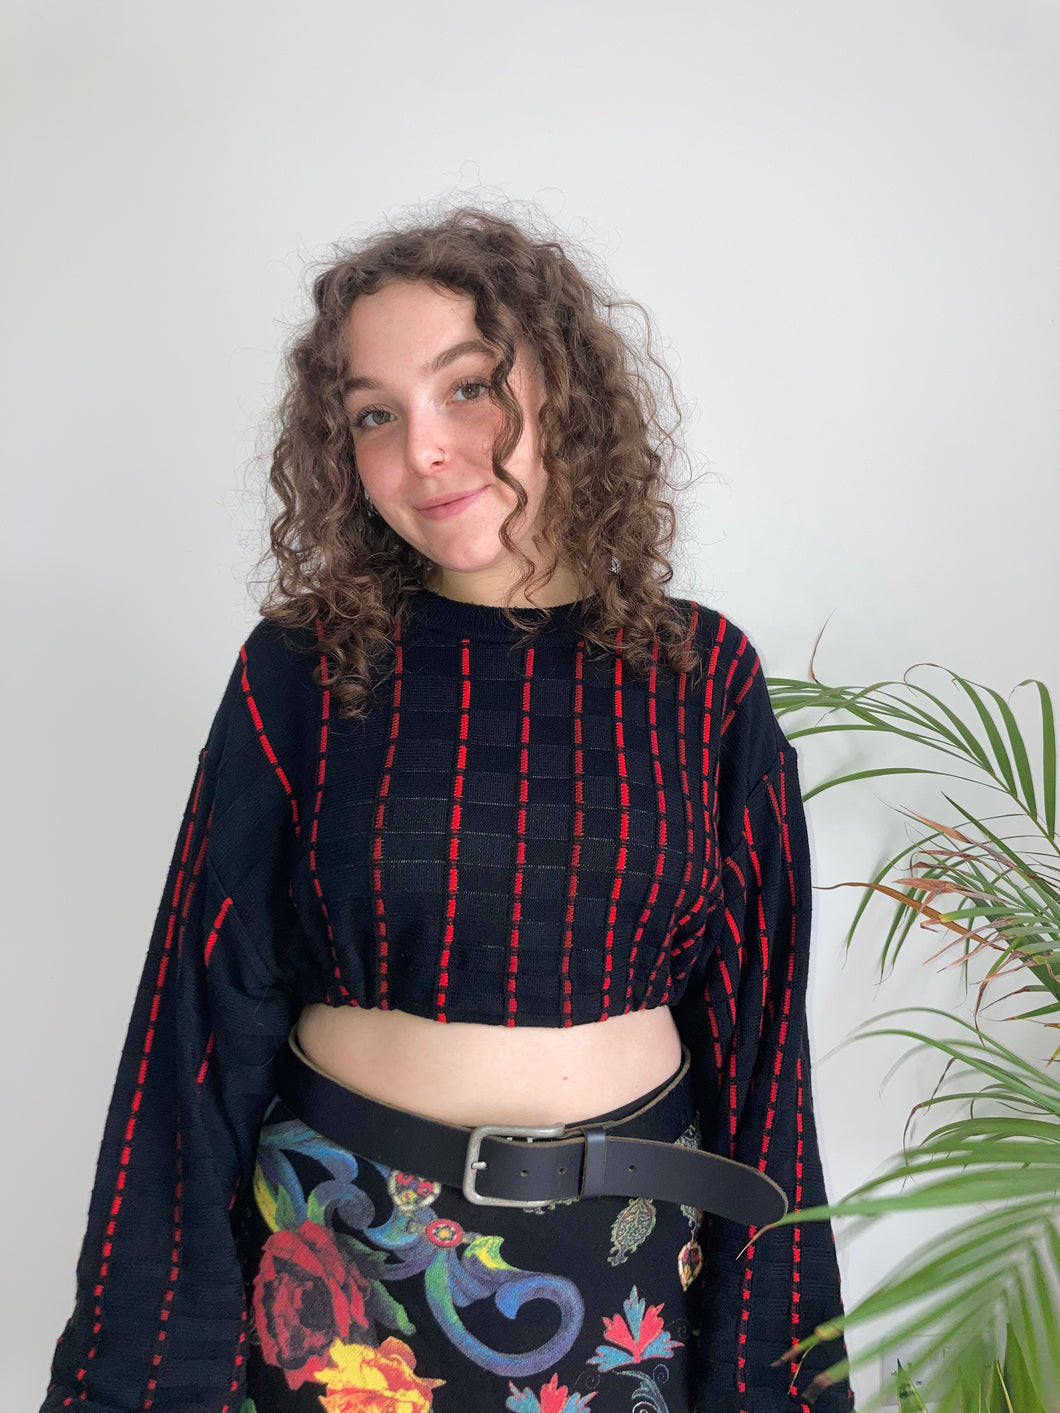 vintage remade black and red knit cropped jumper